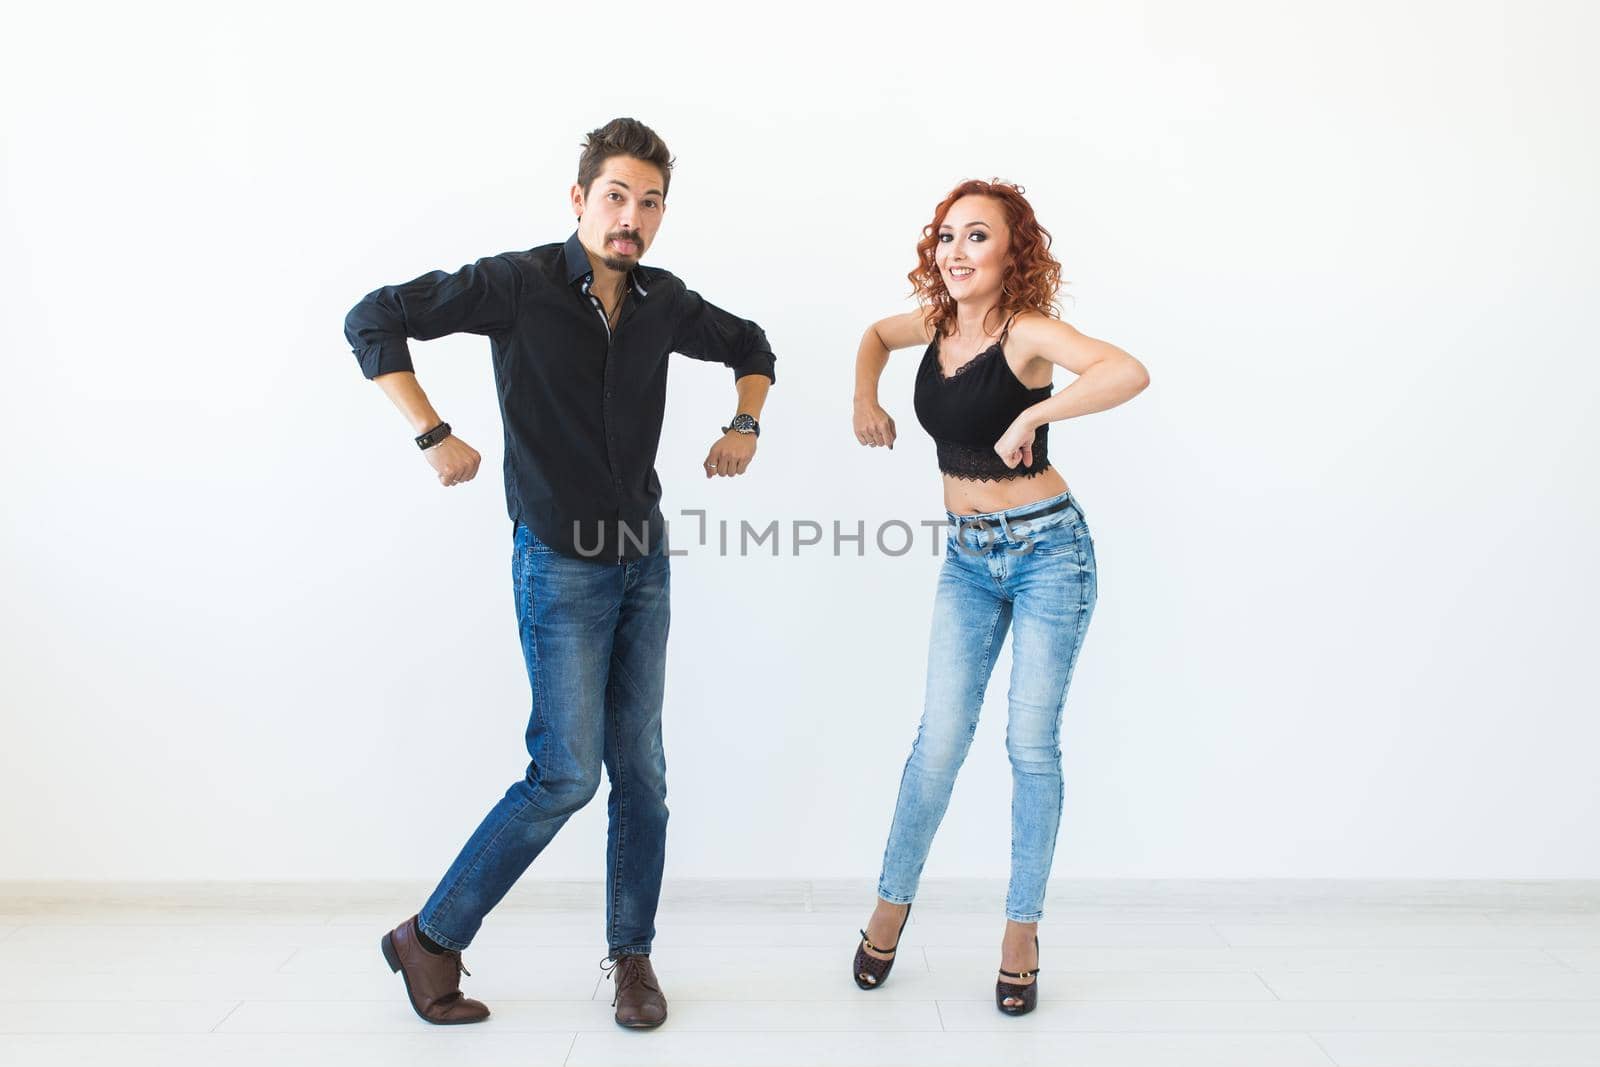 Social dance concept - Crazy dancing, cheerful couple over white background by Satura86